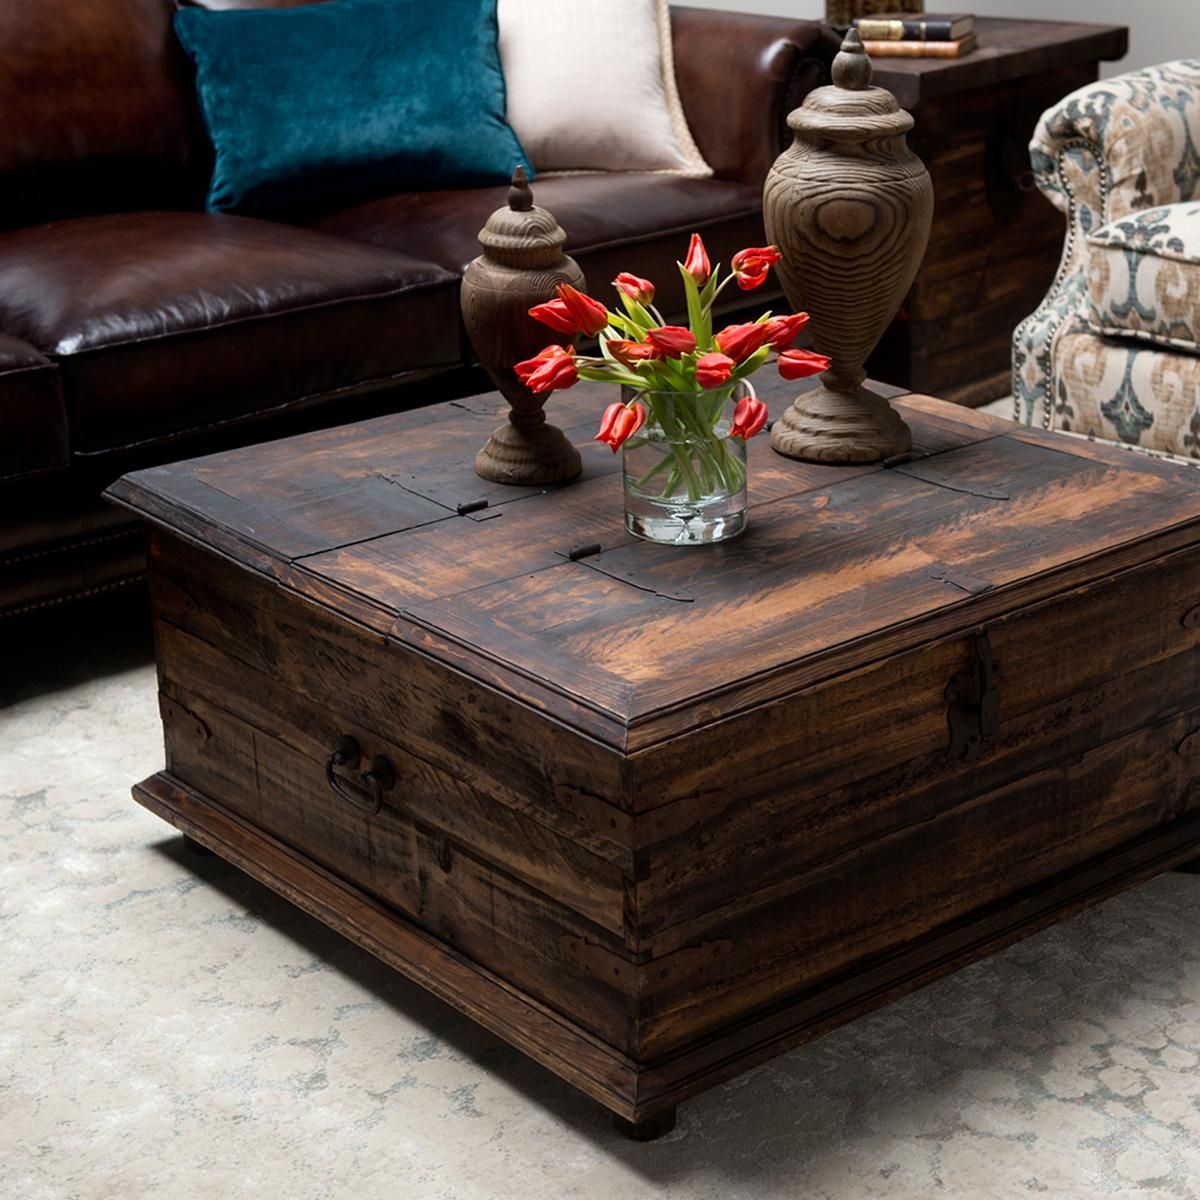 Rustic Trunk Coffee Table For Your Living Room – Homes Furniture Ideas Regarding Rustic Coffee Tables (View 8 of 20)